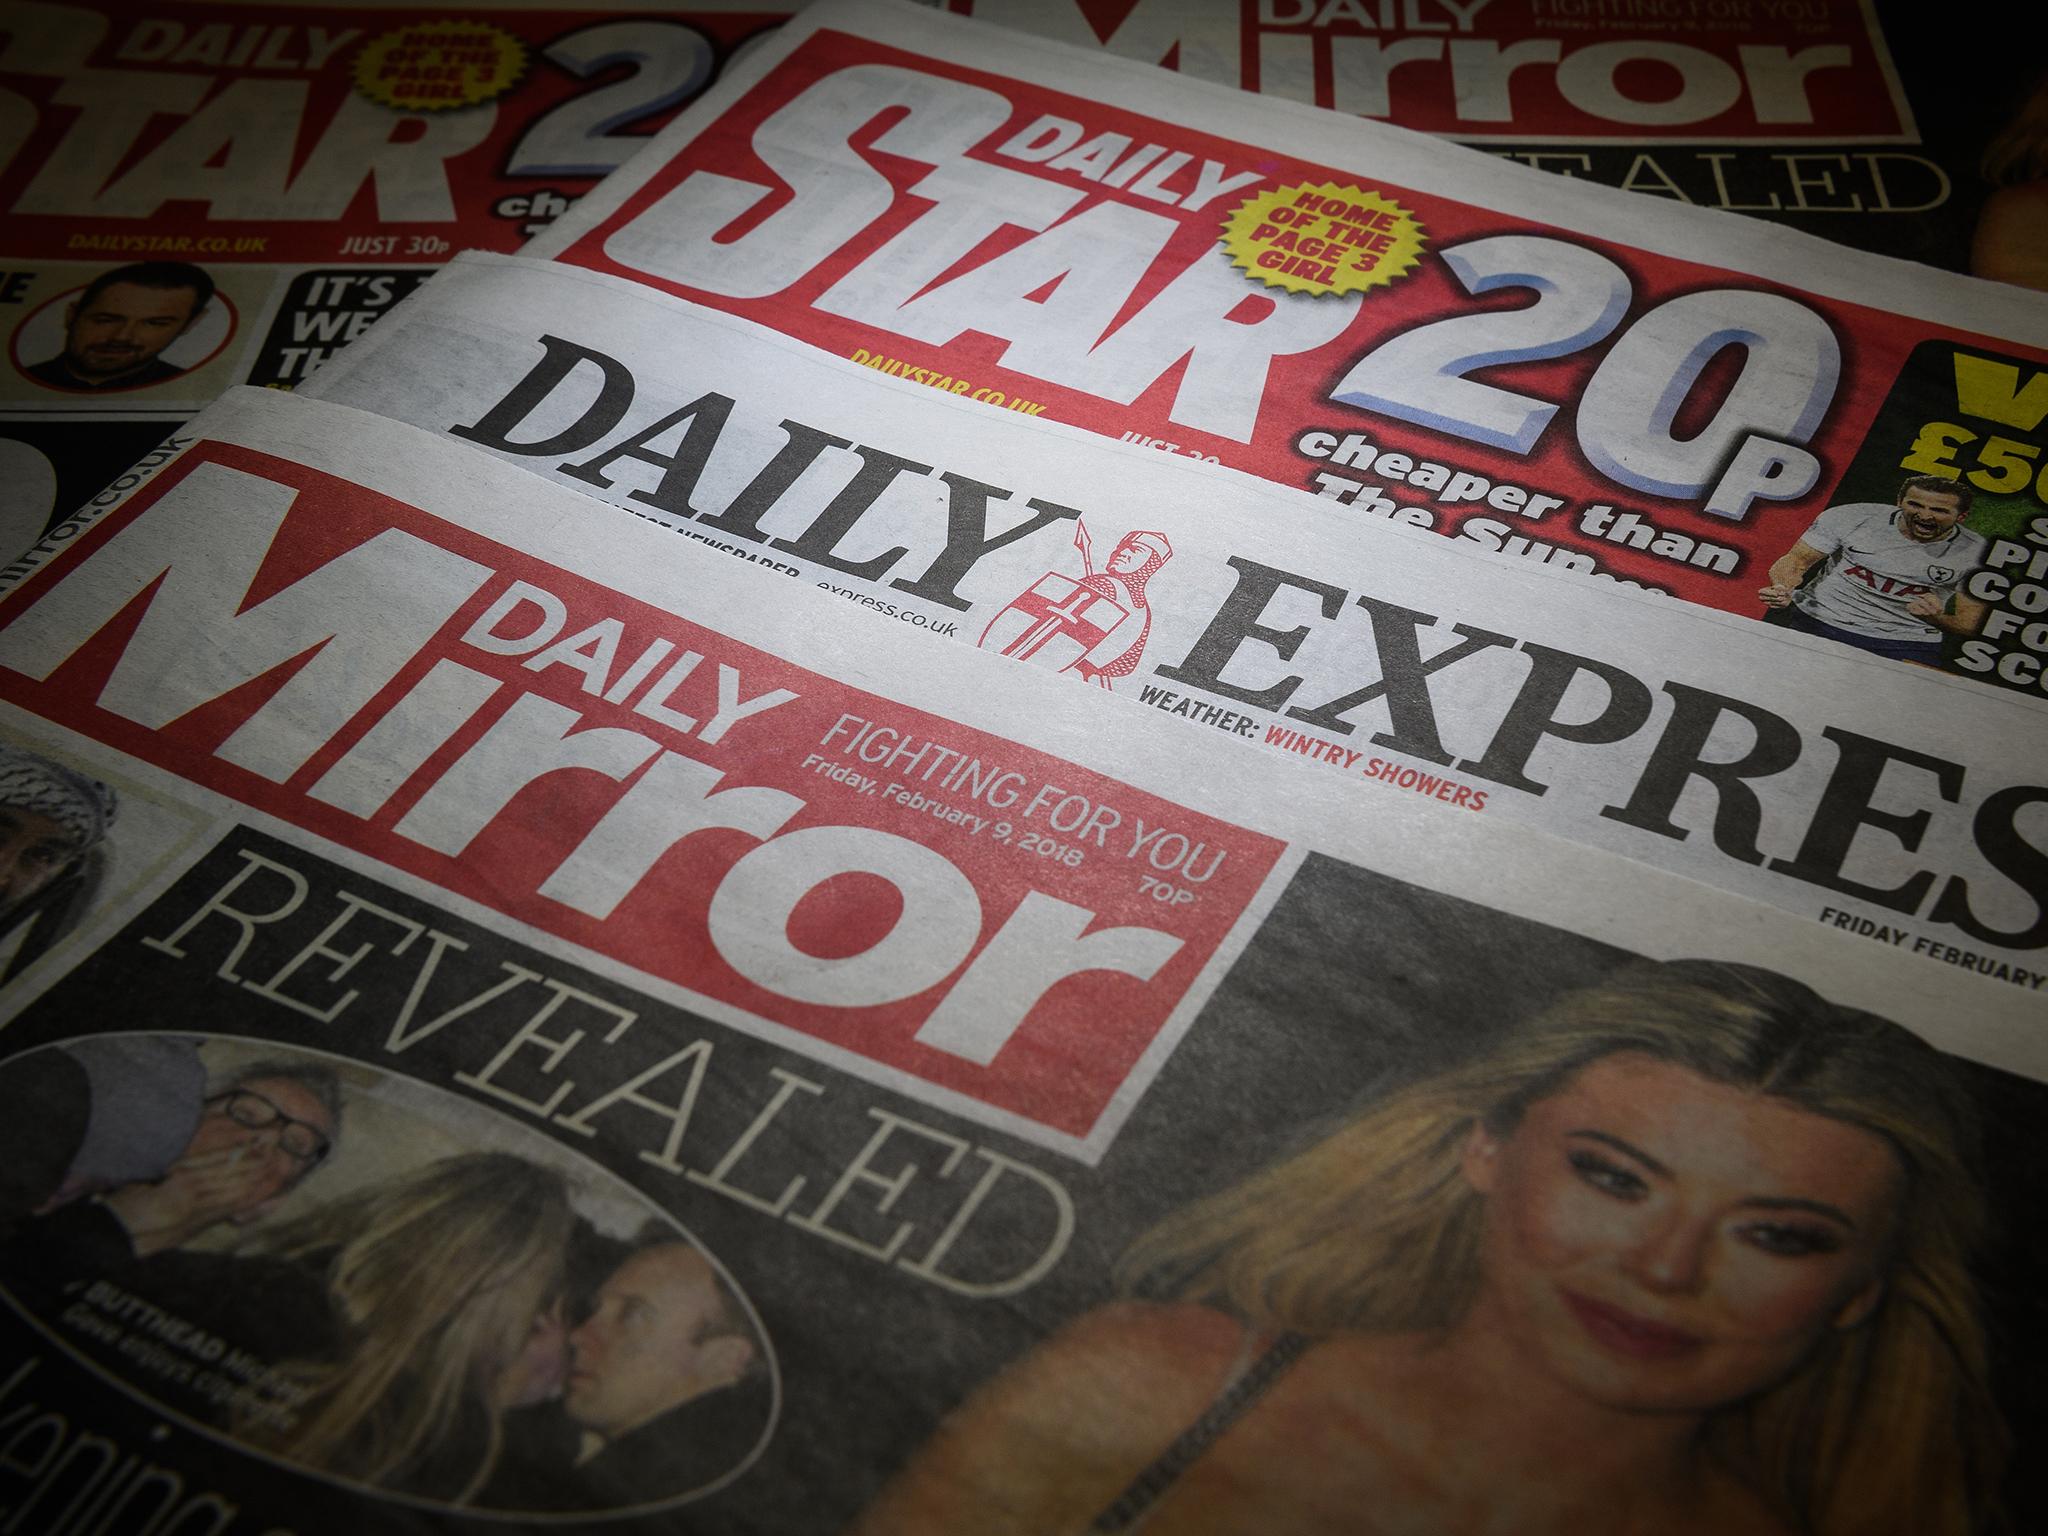 In February, Trinity announced a £126.7m deal to buy several titles from Northern and Shell, including the Daily Express, the Daily Star and OK! magazine